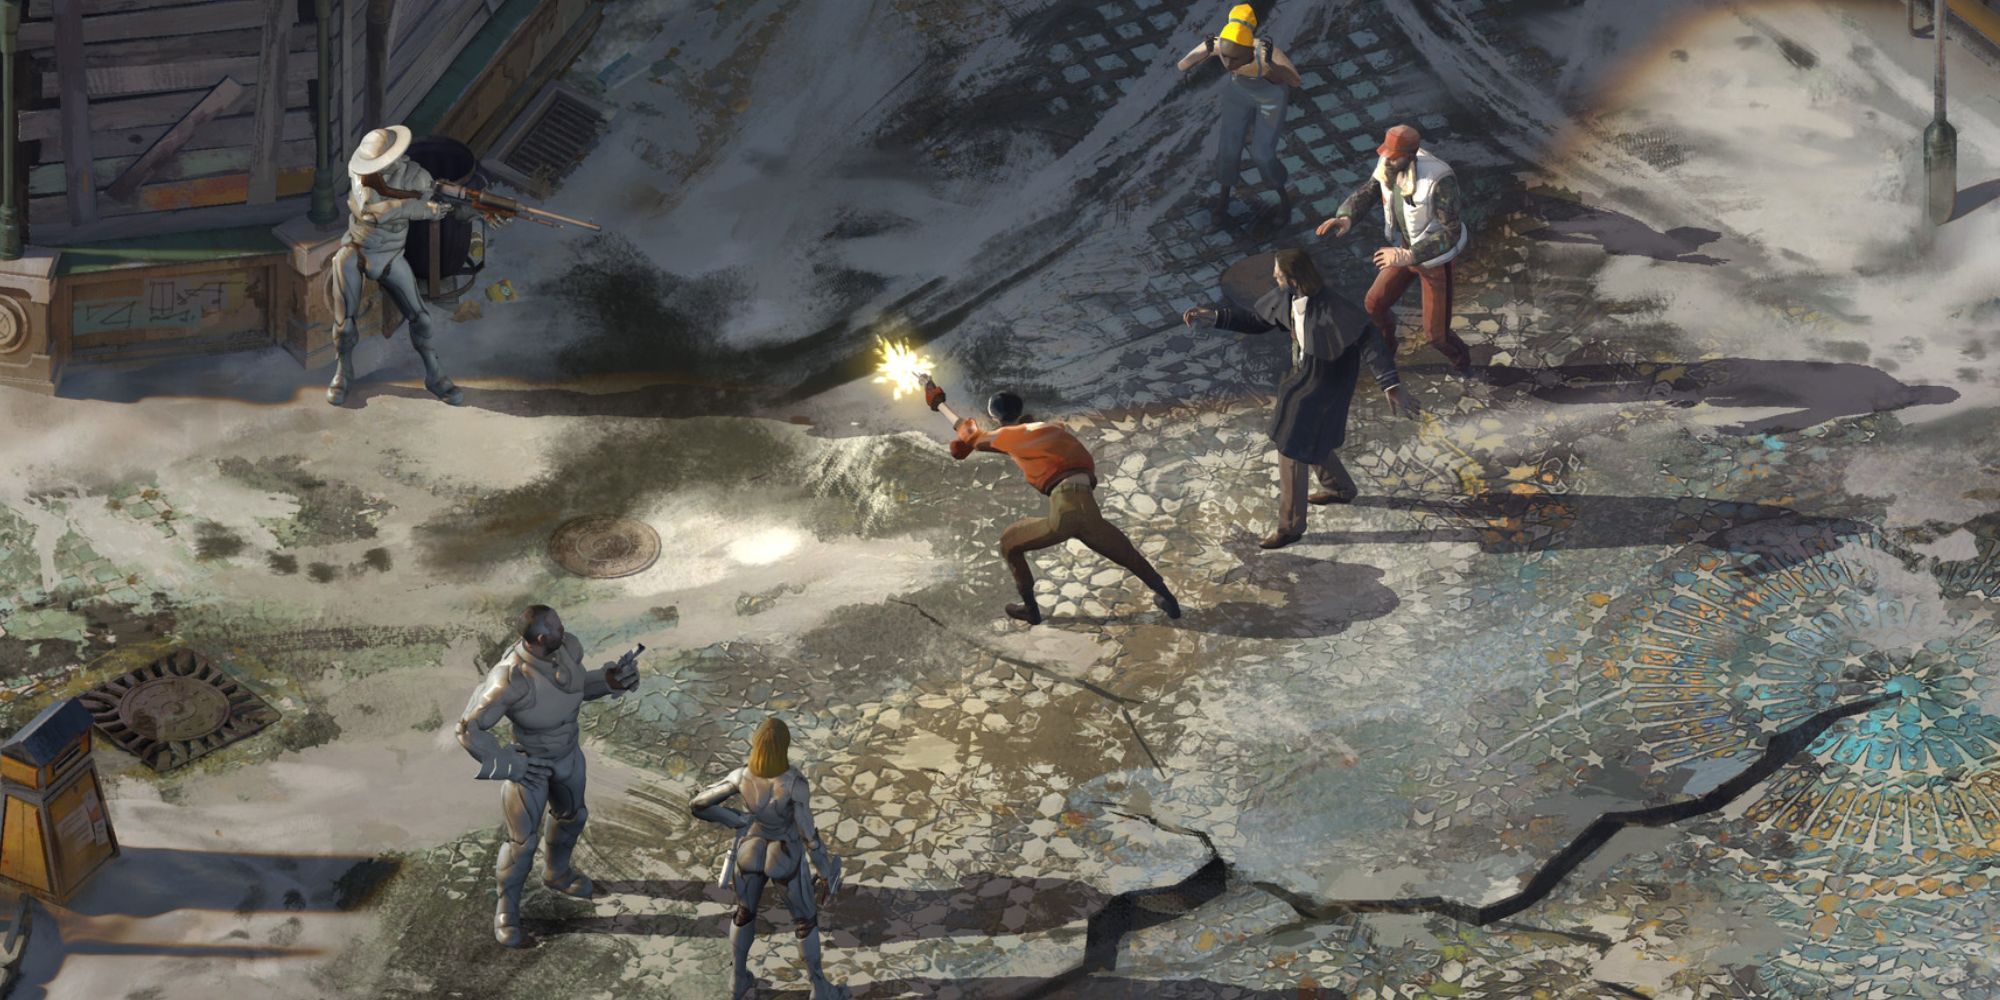 Disco elysium Screenshot of characters shooting at each other